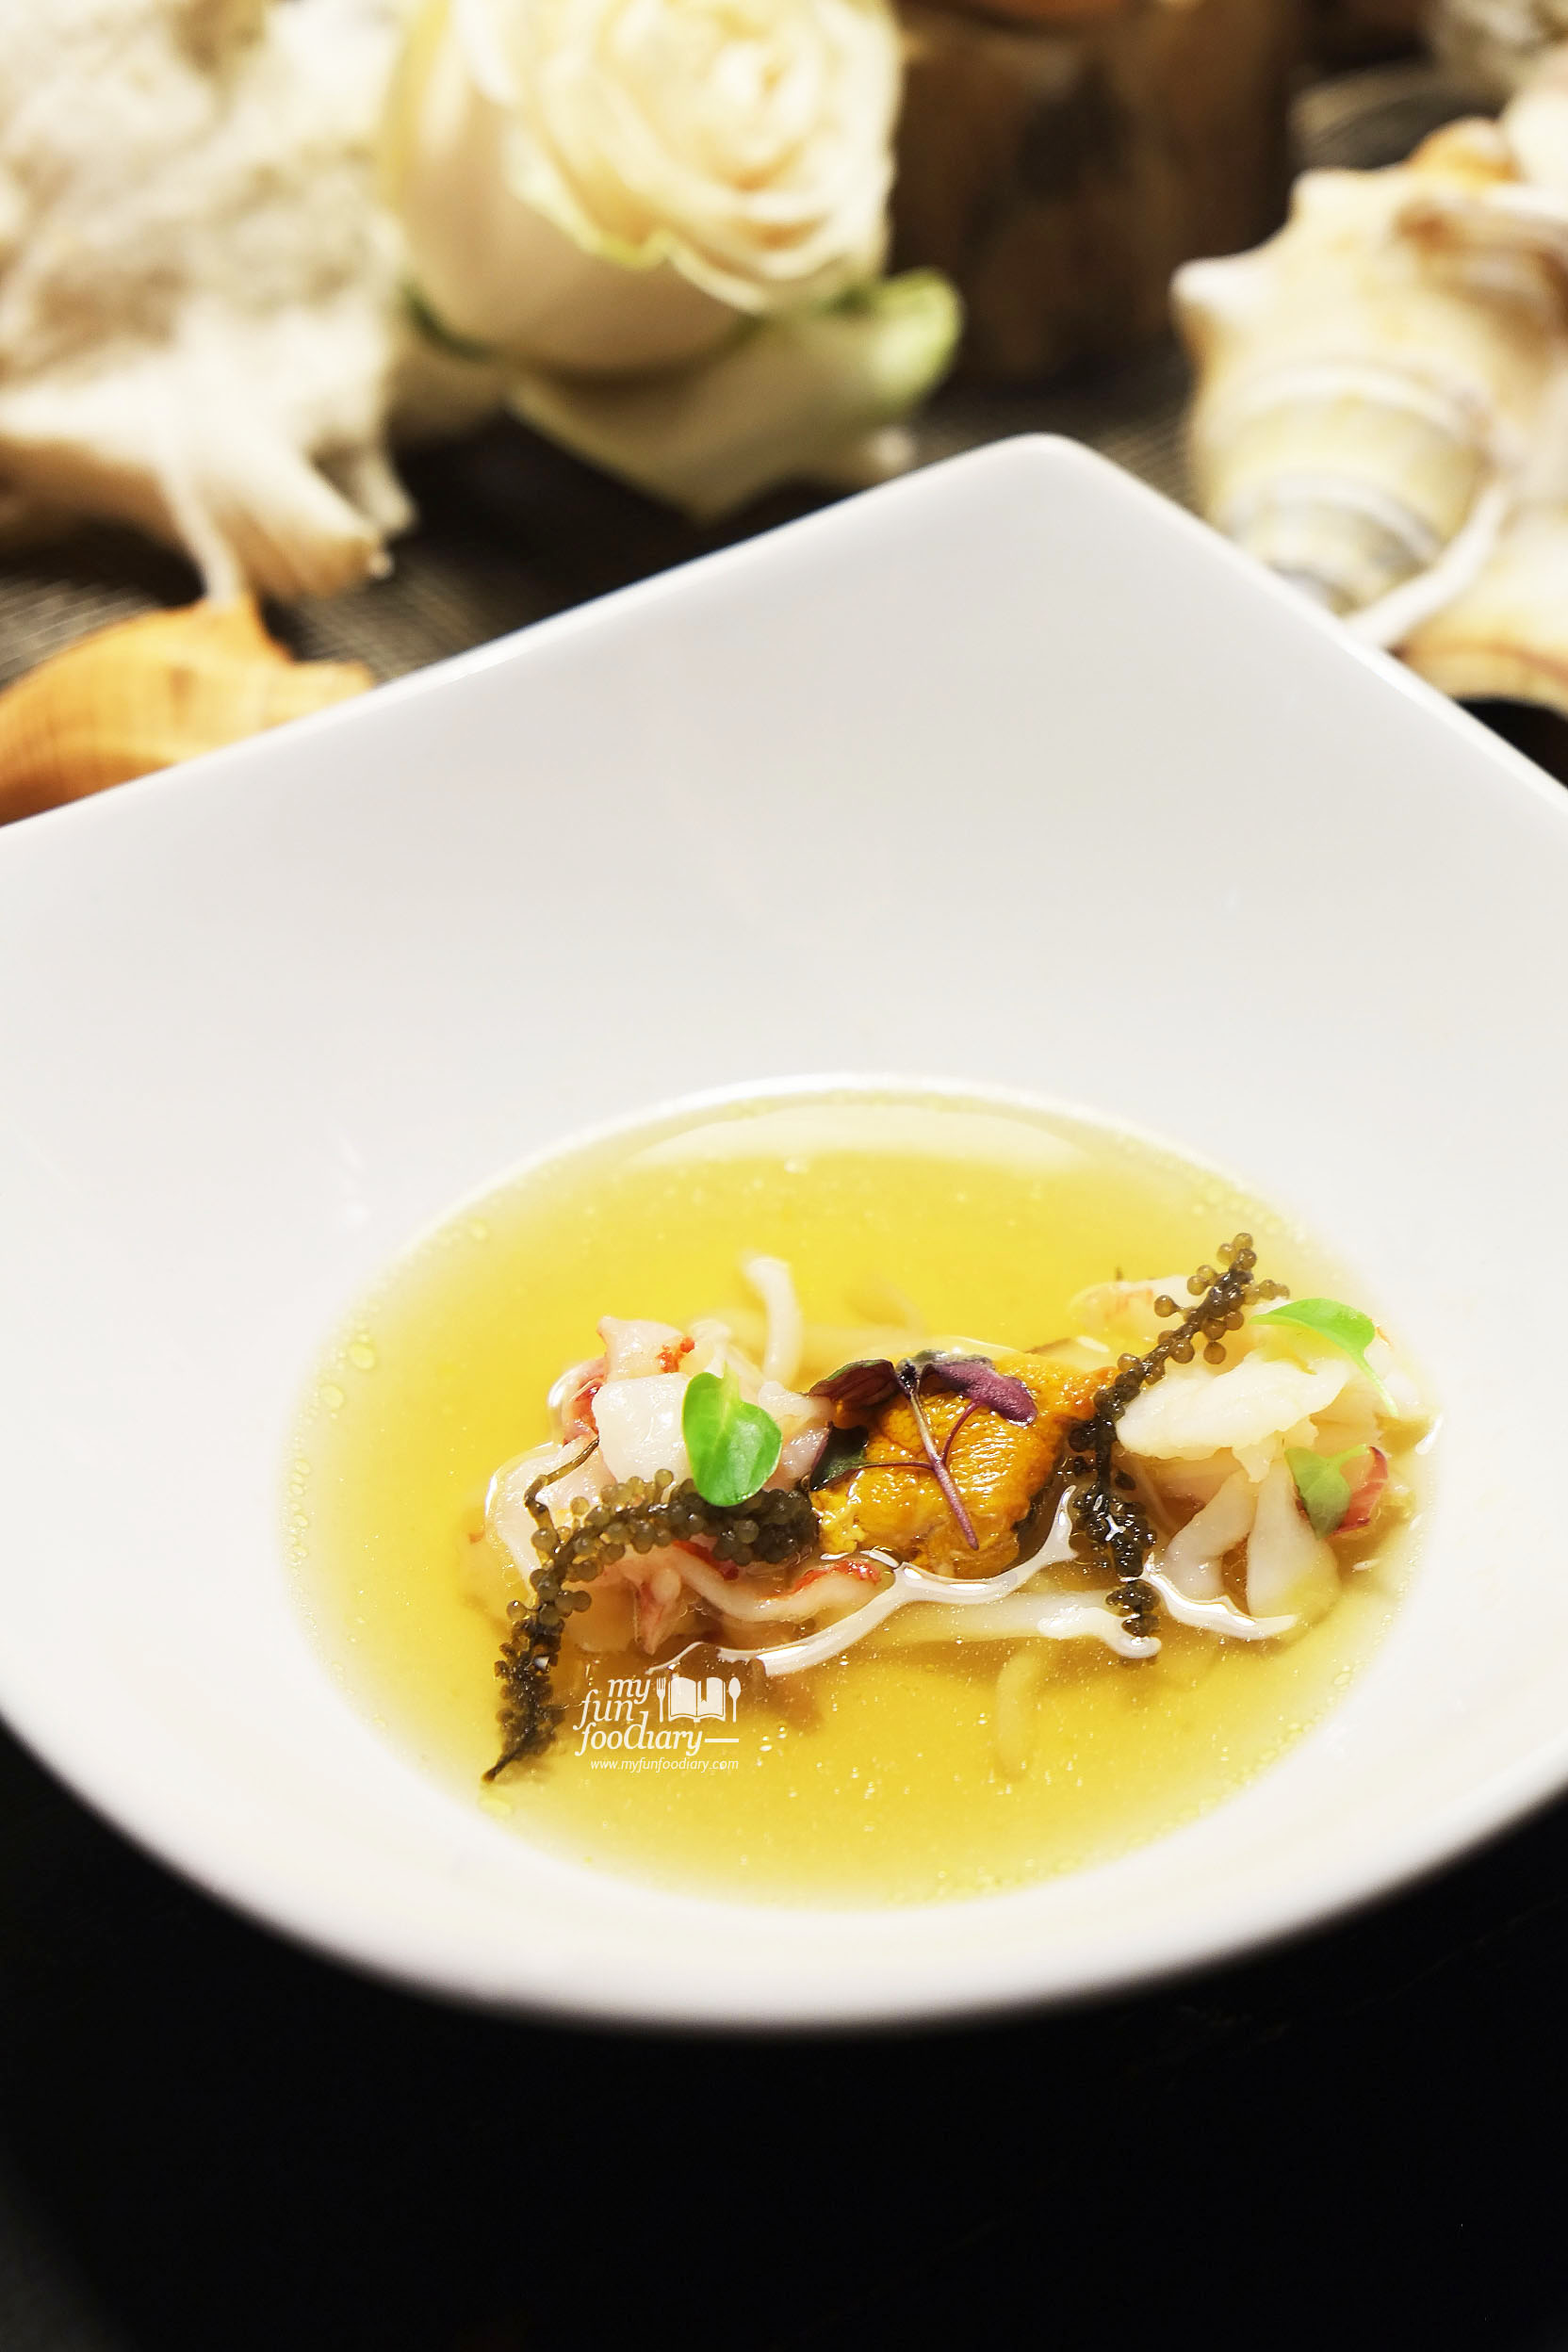 Sea consomme, scallops, octopus, shrimp, clams & sea urchin at Real Food Concept Chapter 01 Ocean by Myfunfoodiary 01